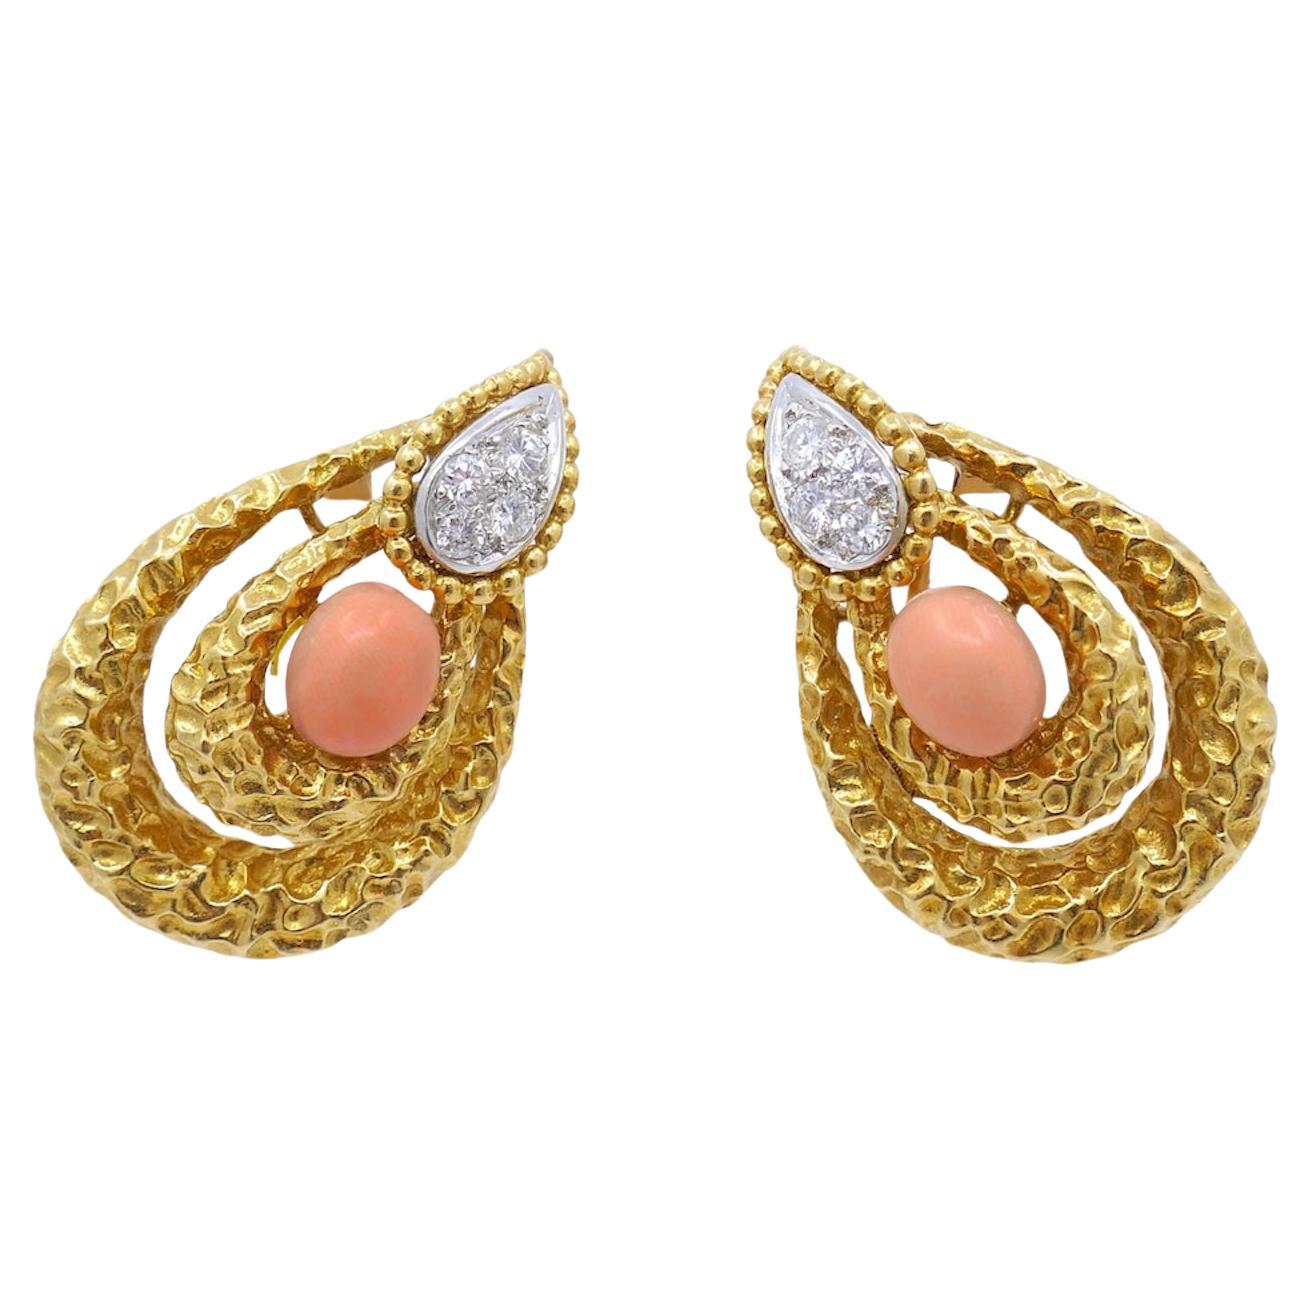 Mauboussin Paris 18k Hammered Gold Diamond Coral Earrings For Sale